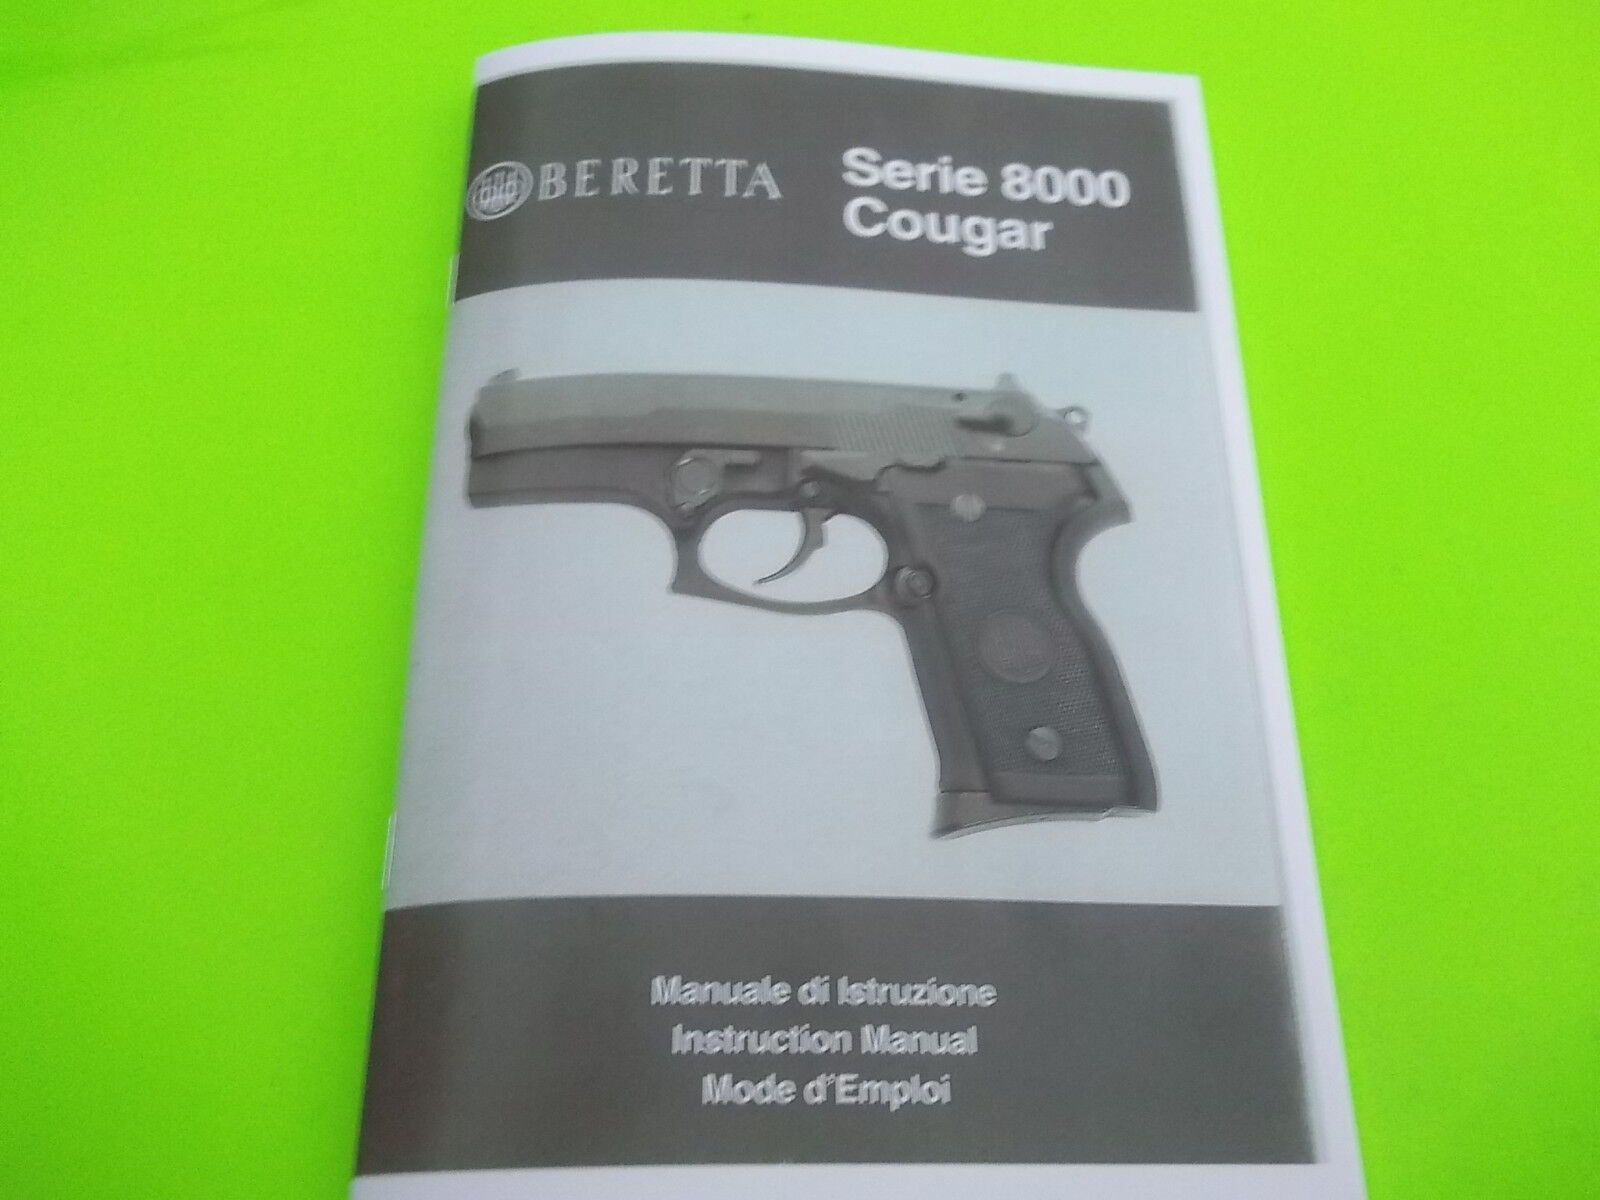 BERETTA COUGAR MODEL 8000 SEMI-AUTO PISTOL OWNERS MANUAL, 64 pages of info